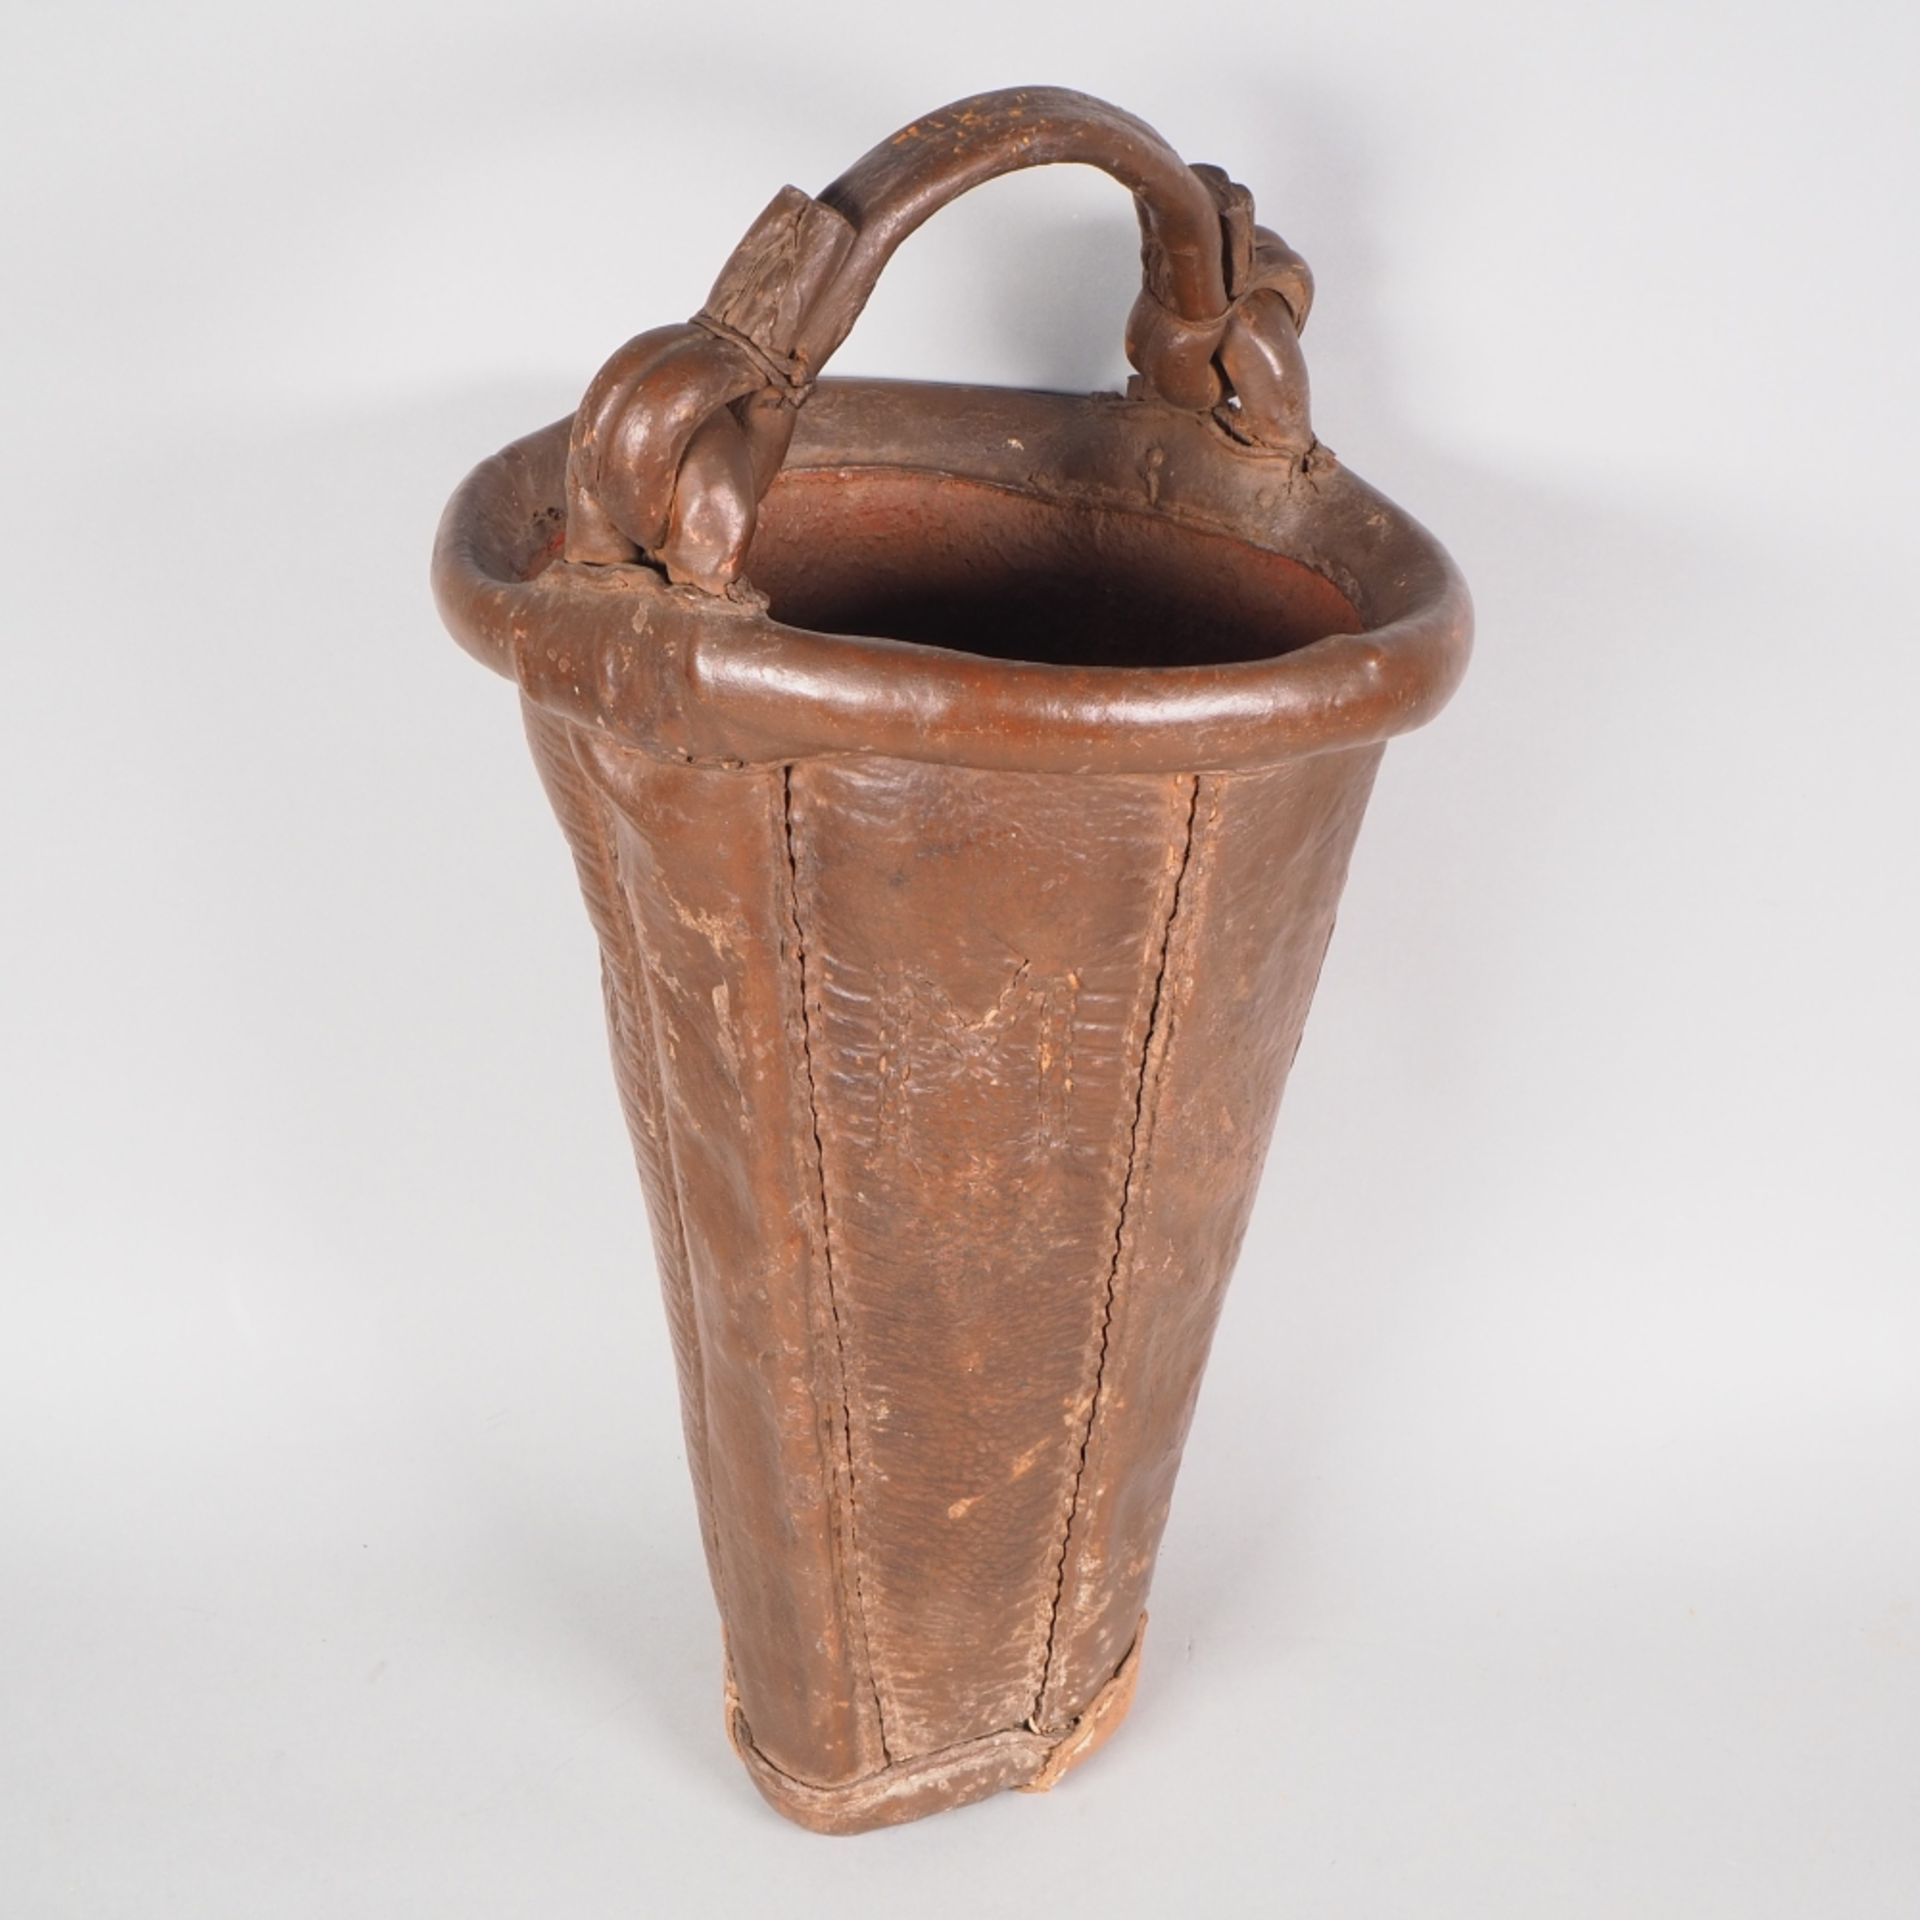 Antique leather fire bucket, 18th/19th century, probably German